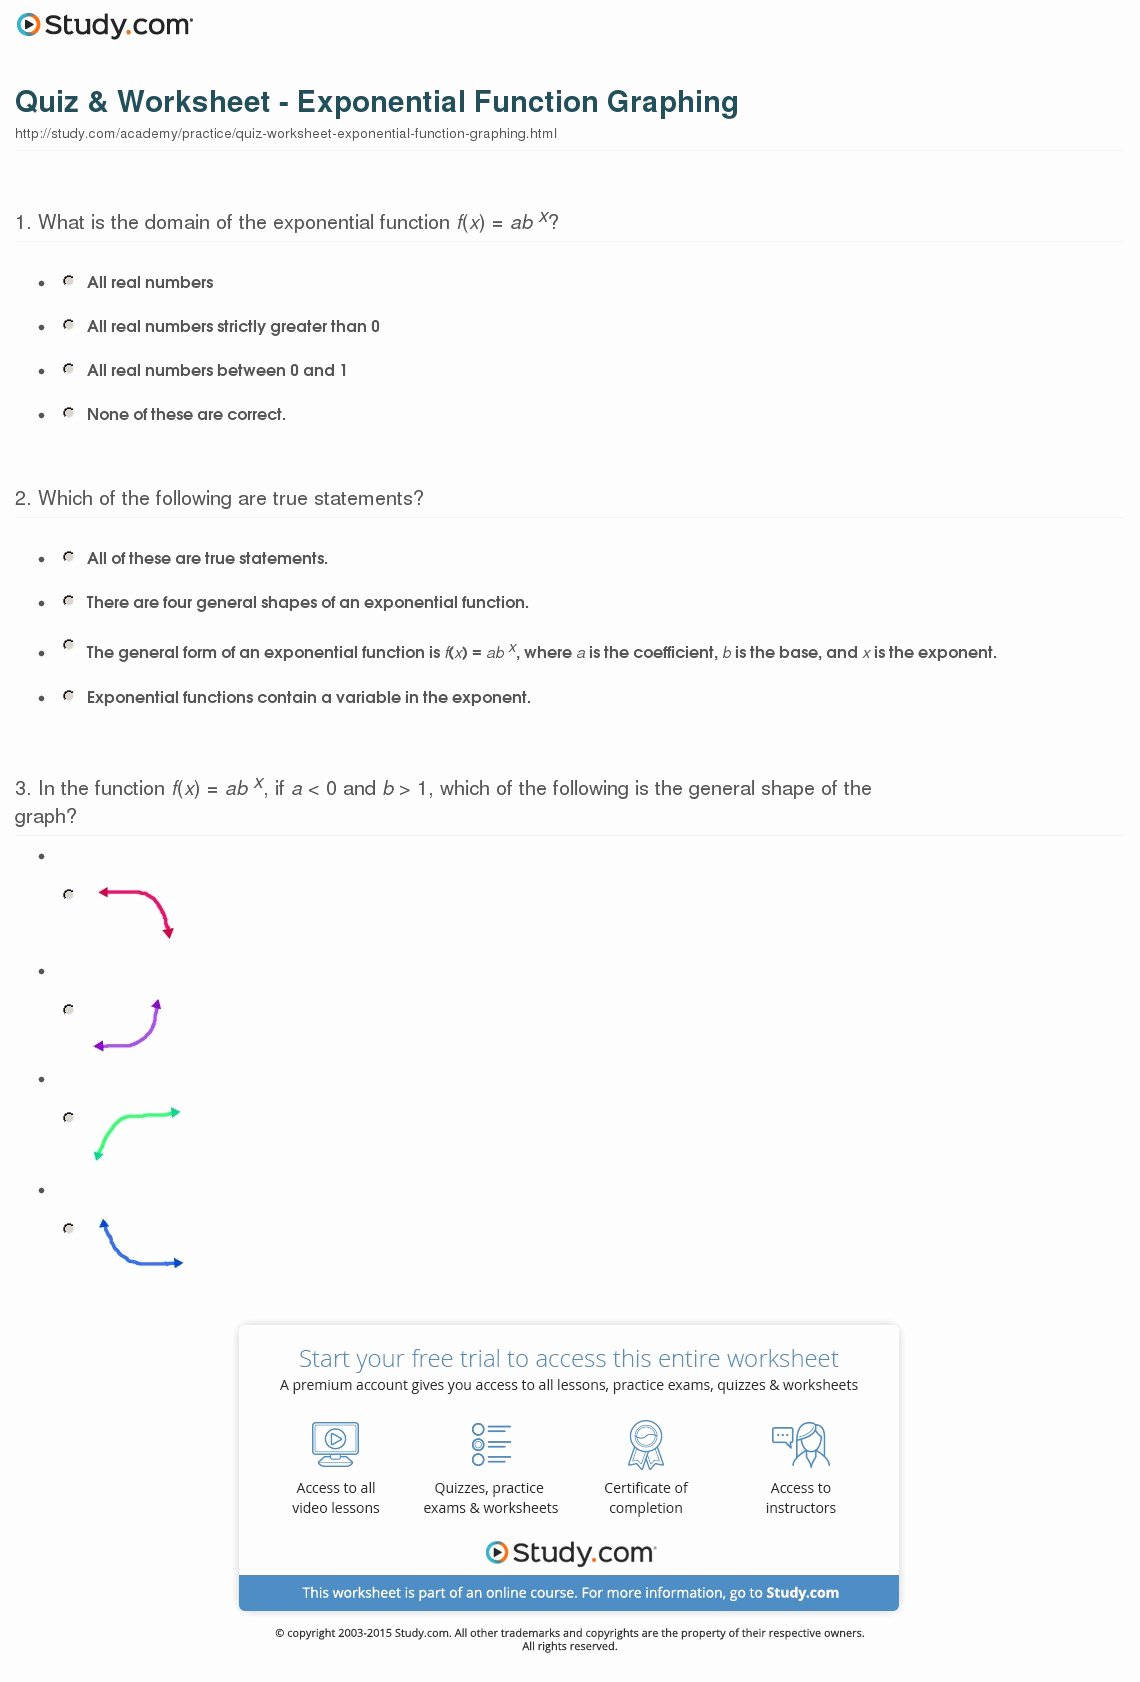 Graphing Exponential Functions Worksheet Answers Luxury Quiz &amp; Worksheet Exponential Function Graphing